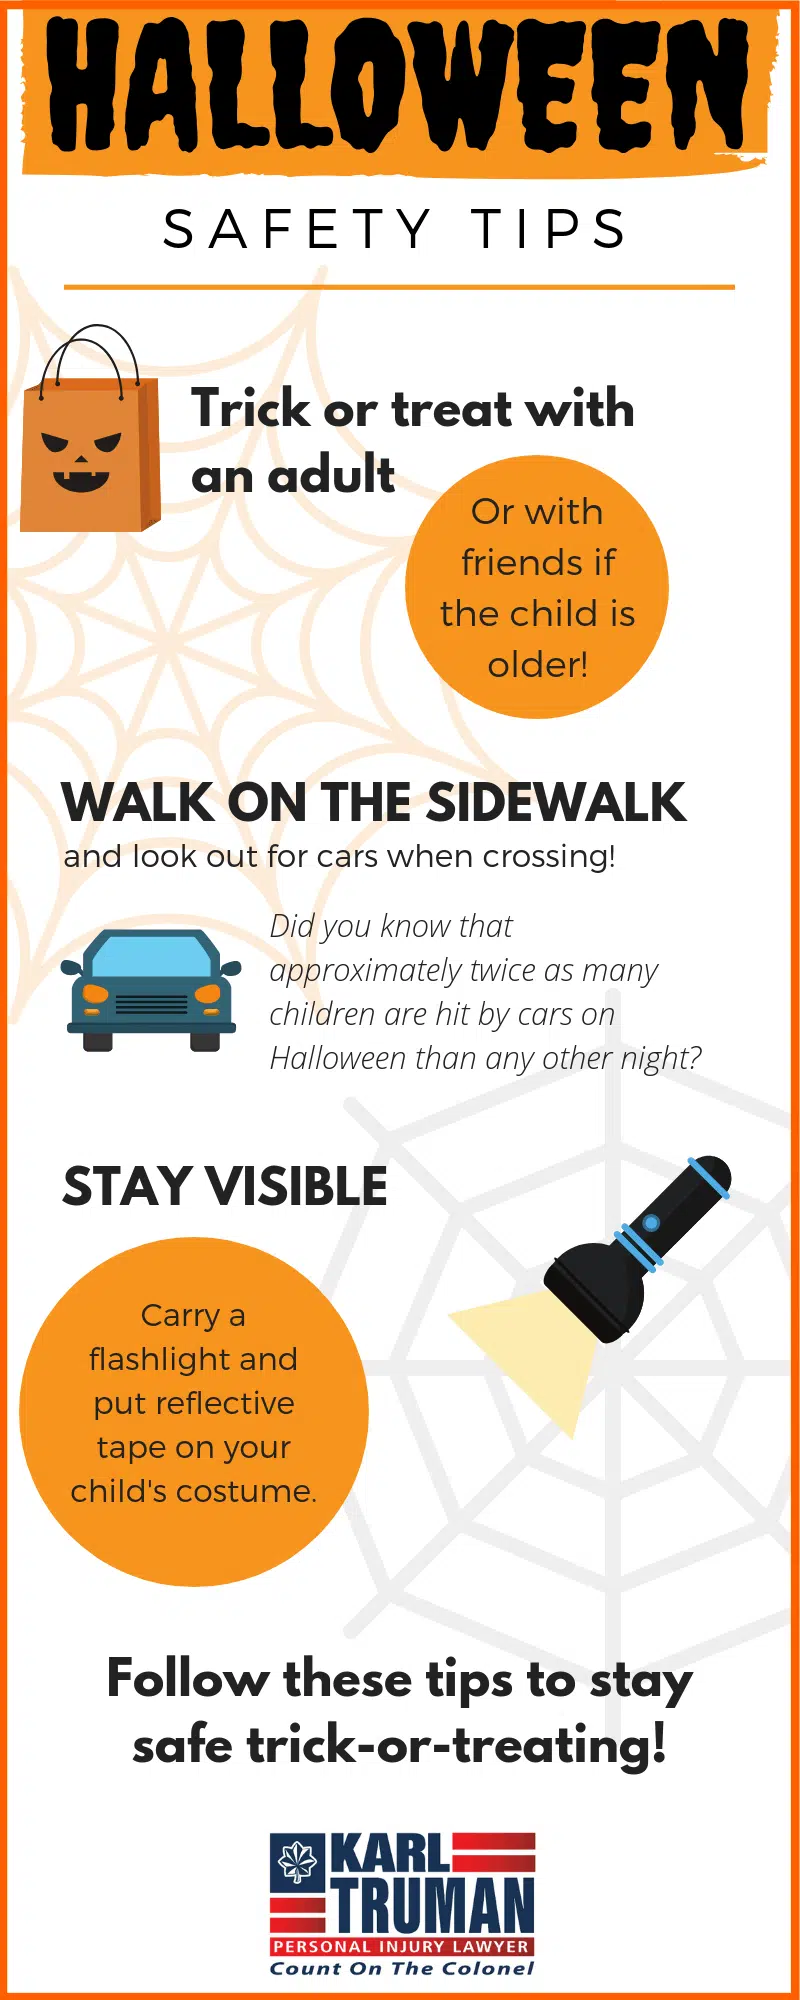 Halloween safety tips for trick or treating, from personal injury lawyer Karl Truman